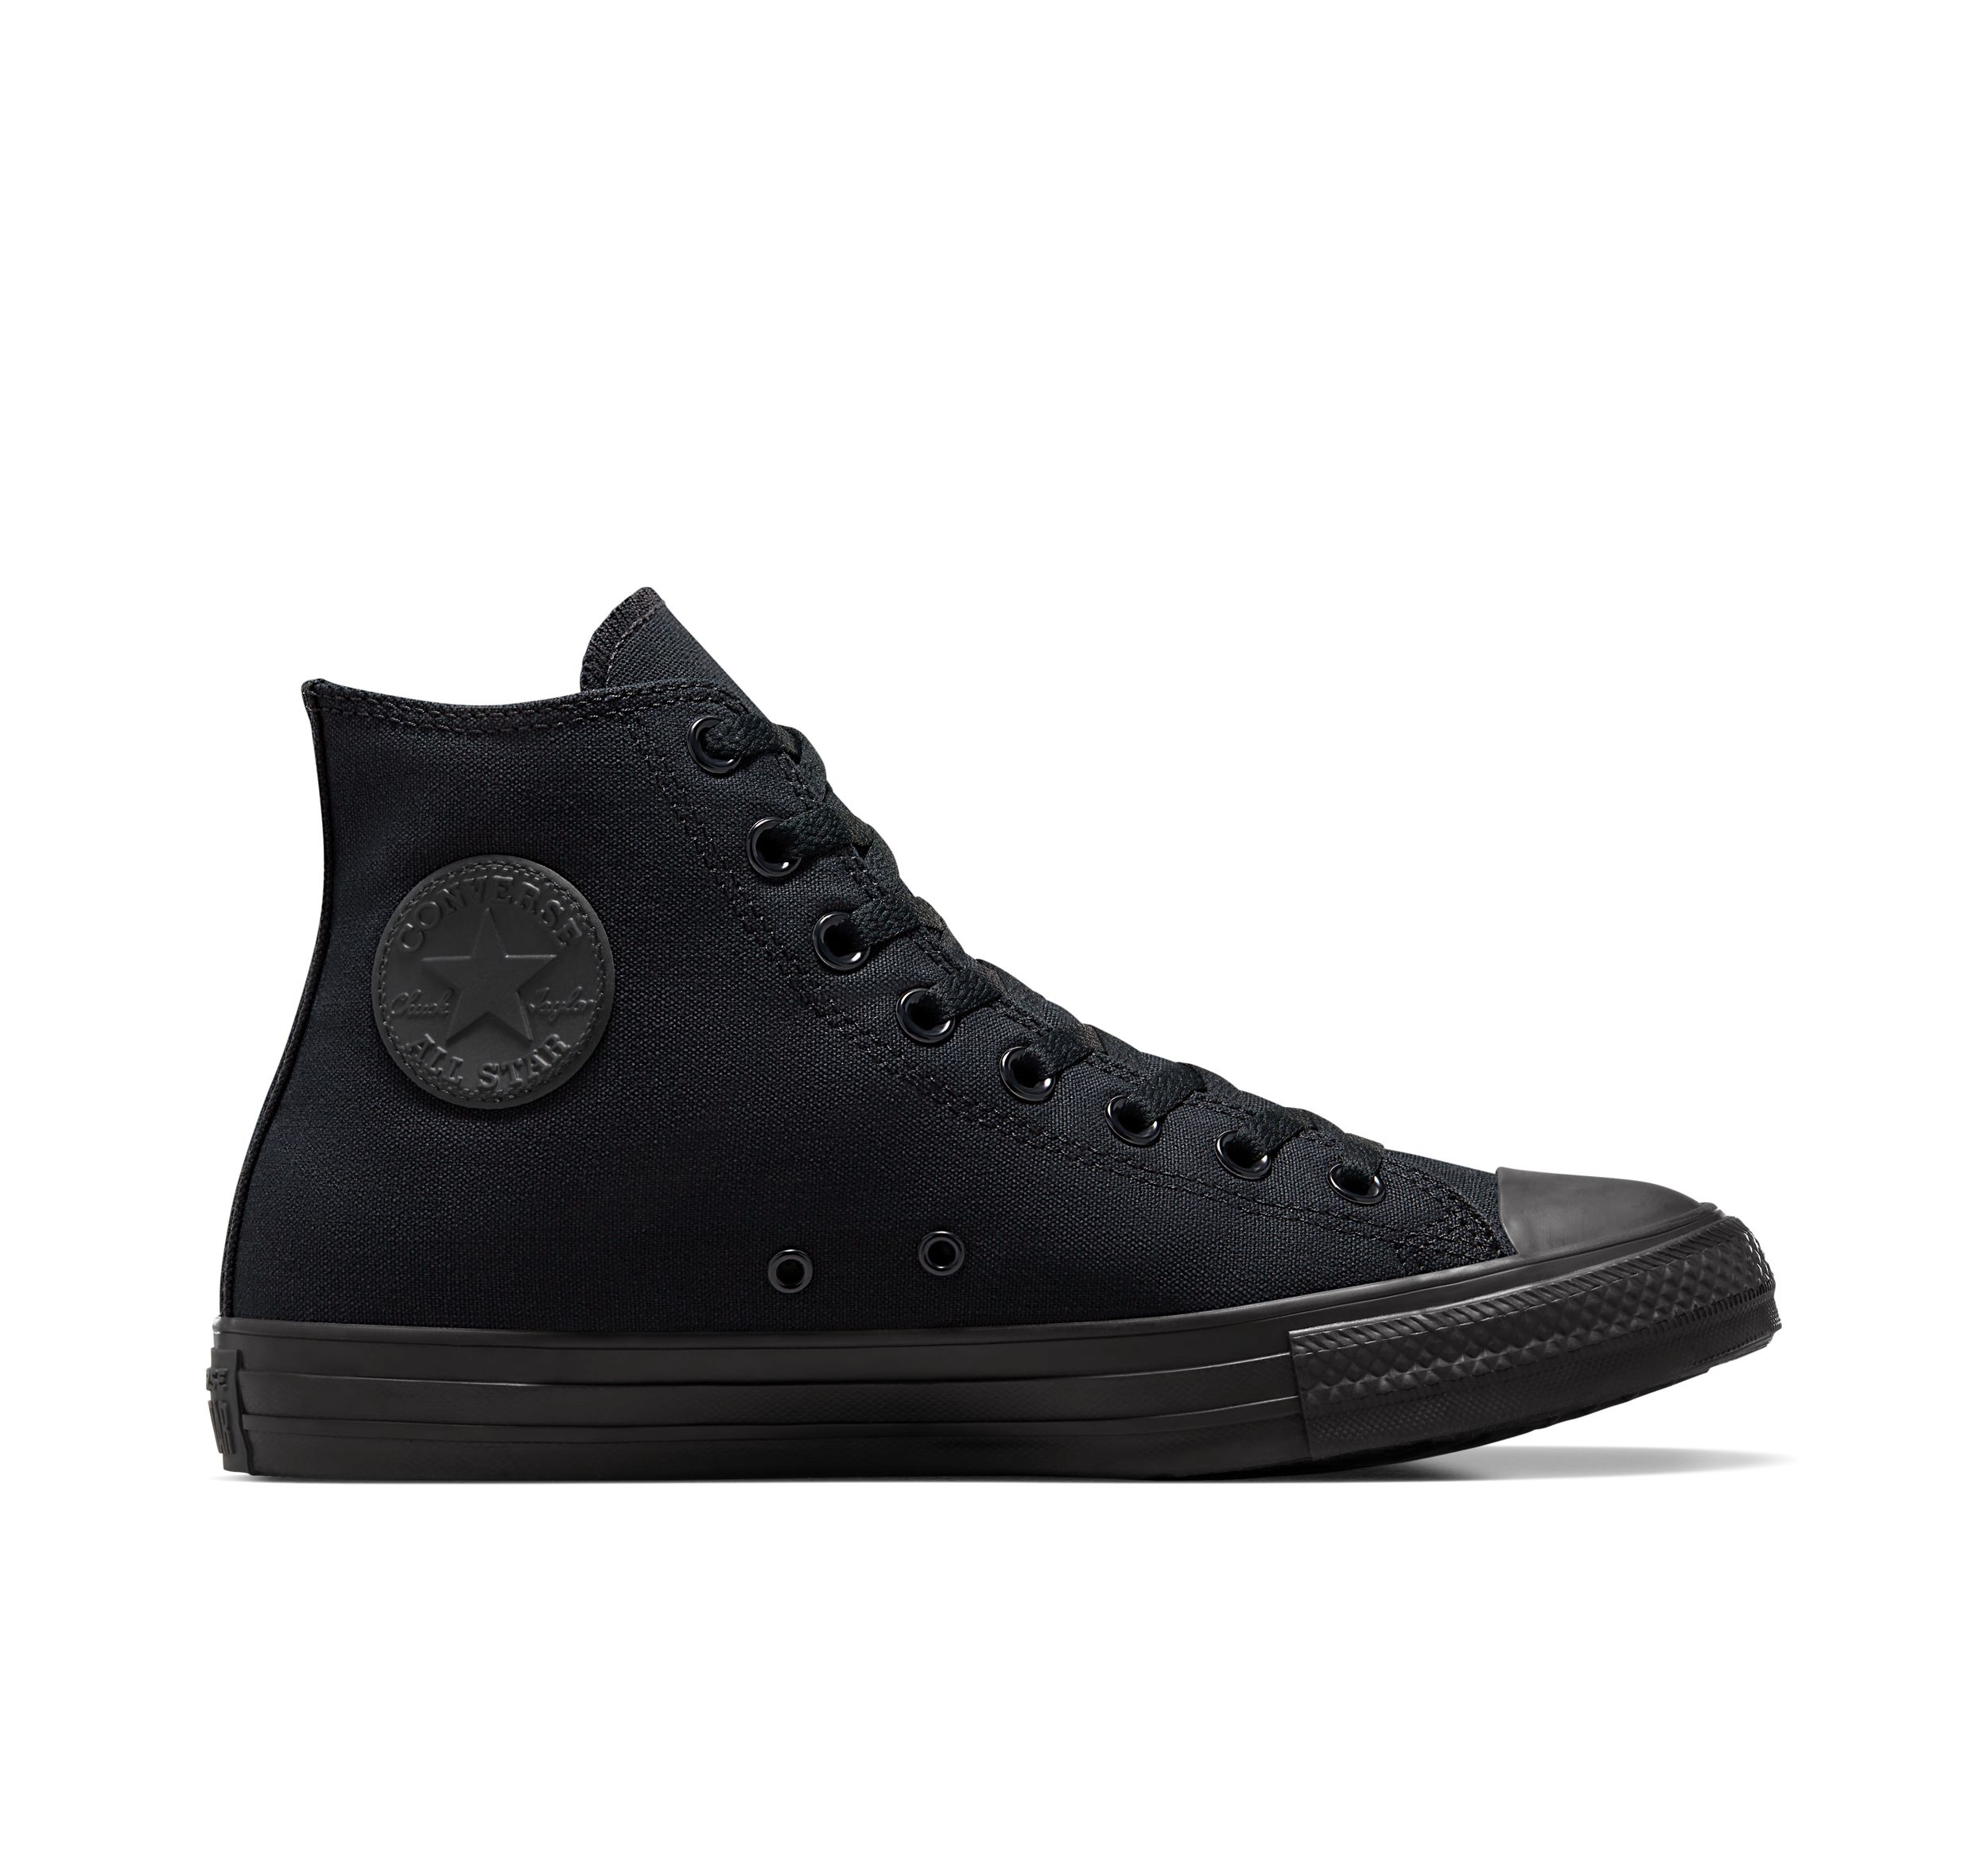 Image of Converse Men's Chuck Taylor High Shoes